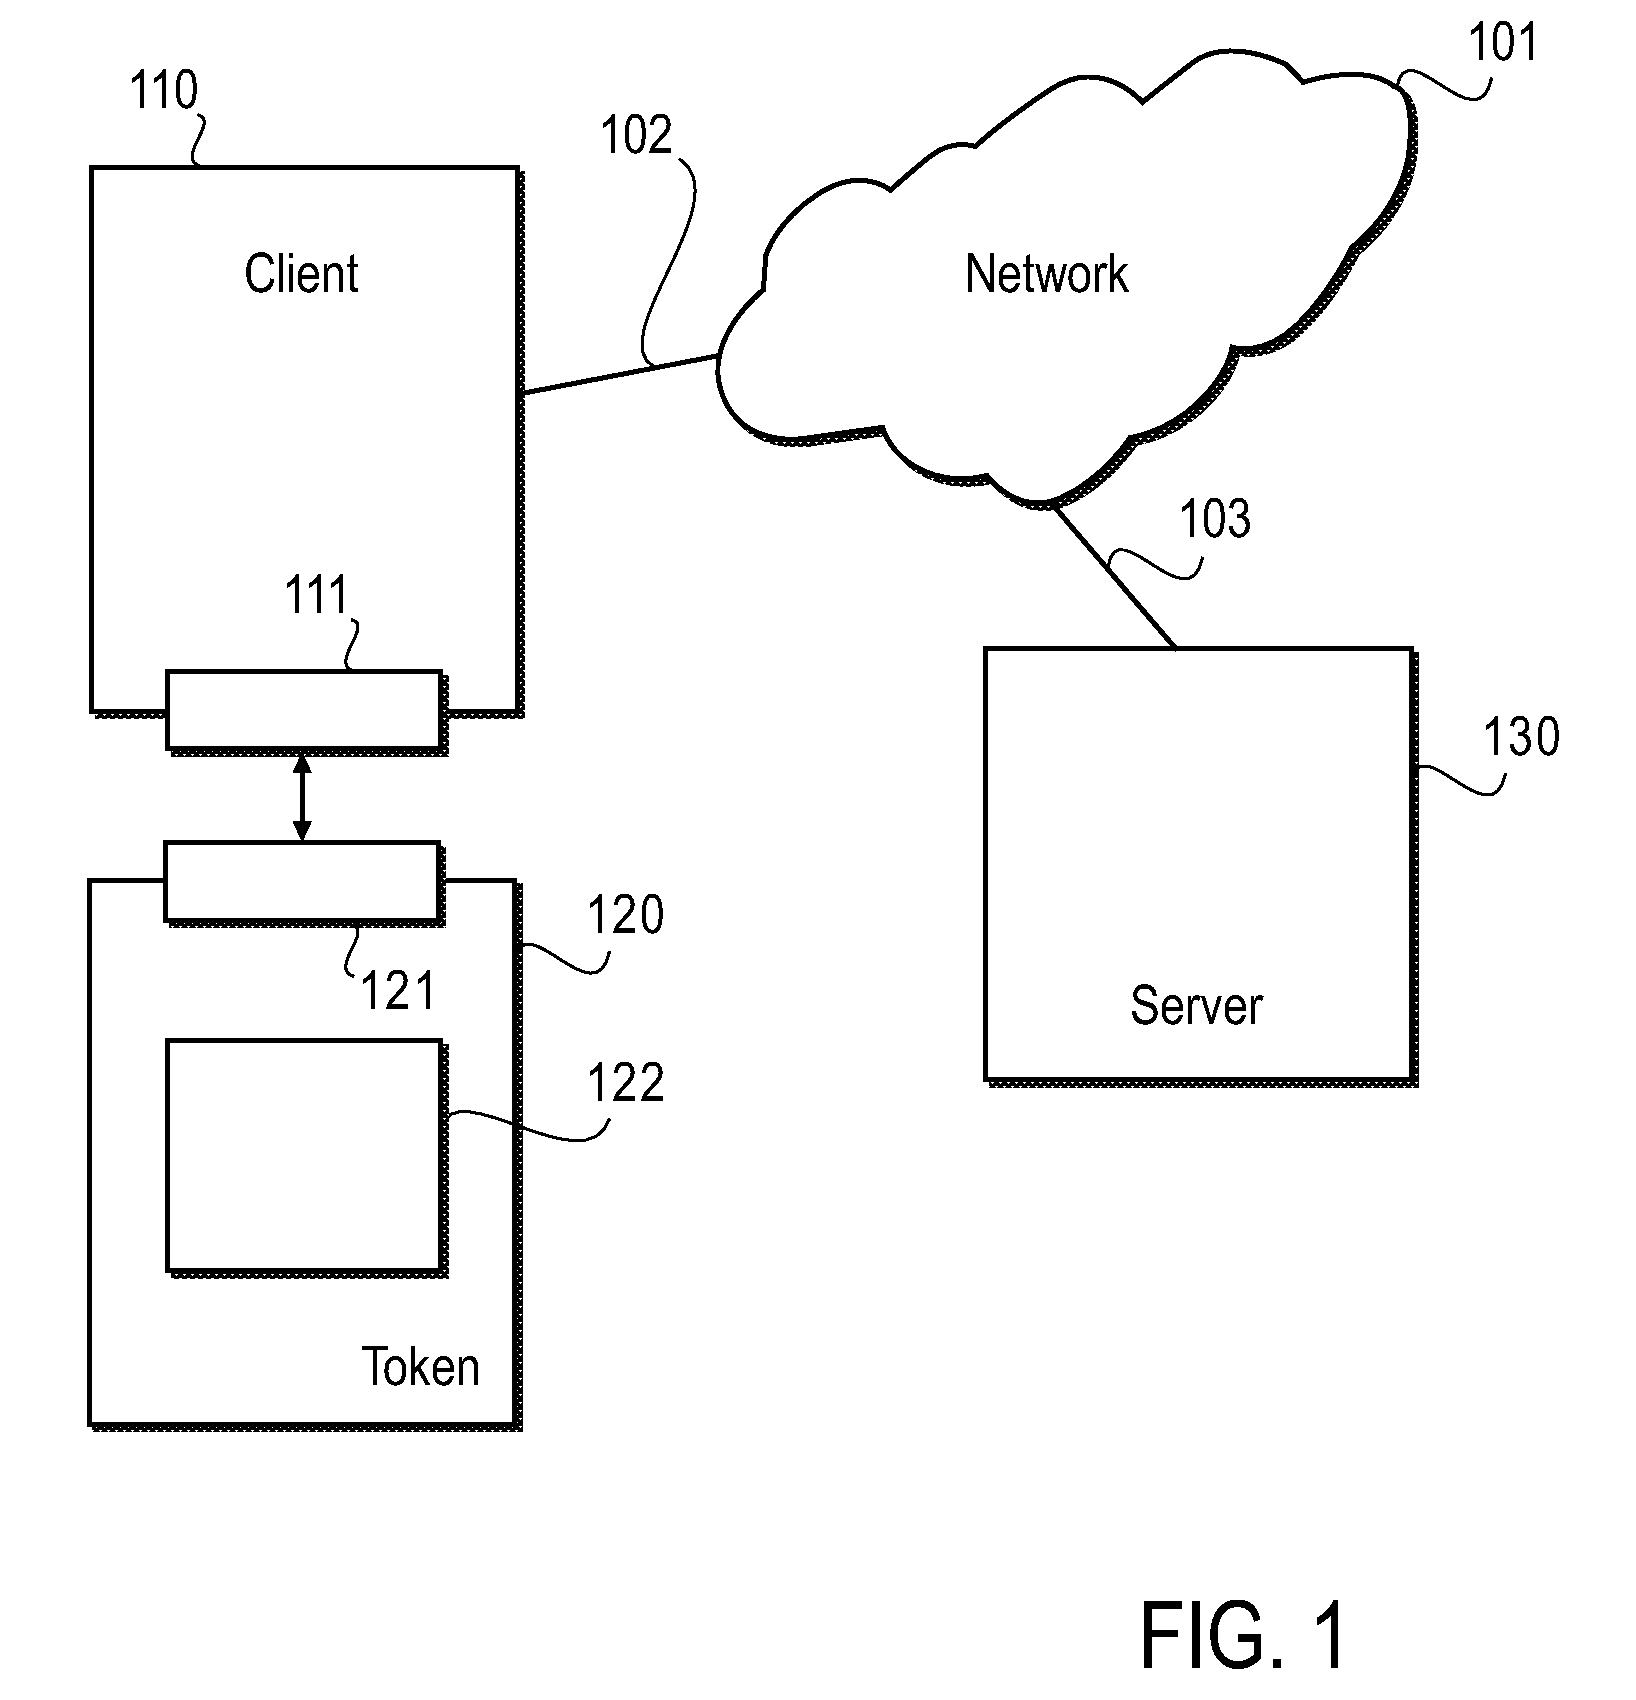 Method and Apparatus for Organizing an Extensible Table for Storing Cryptographic Objects